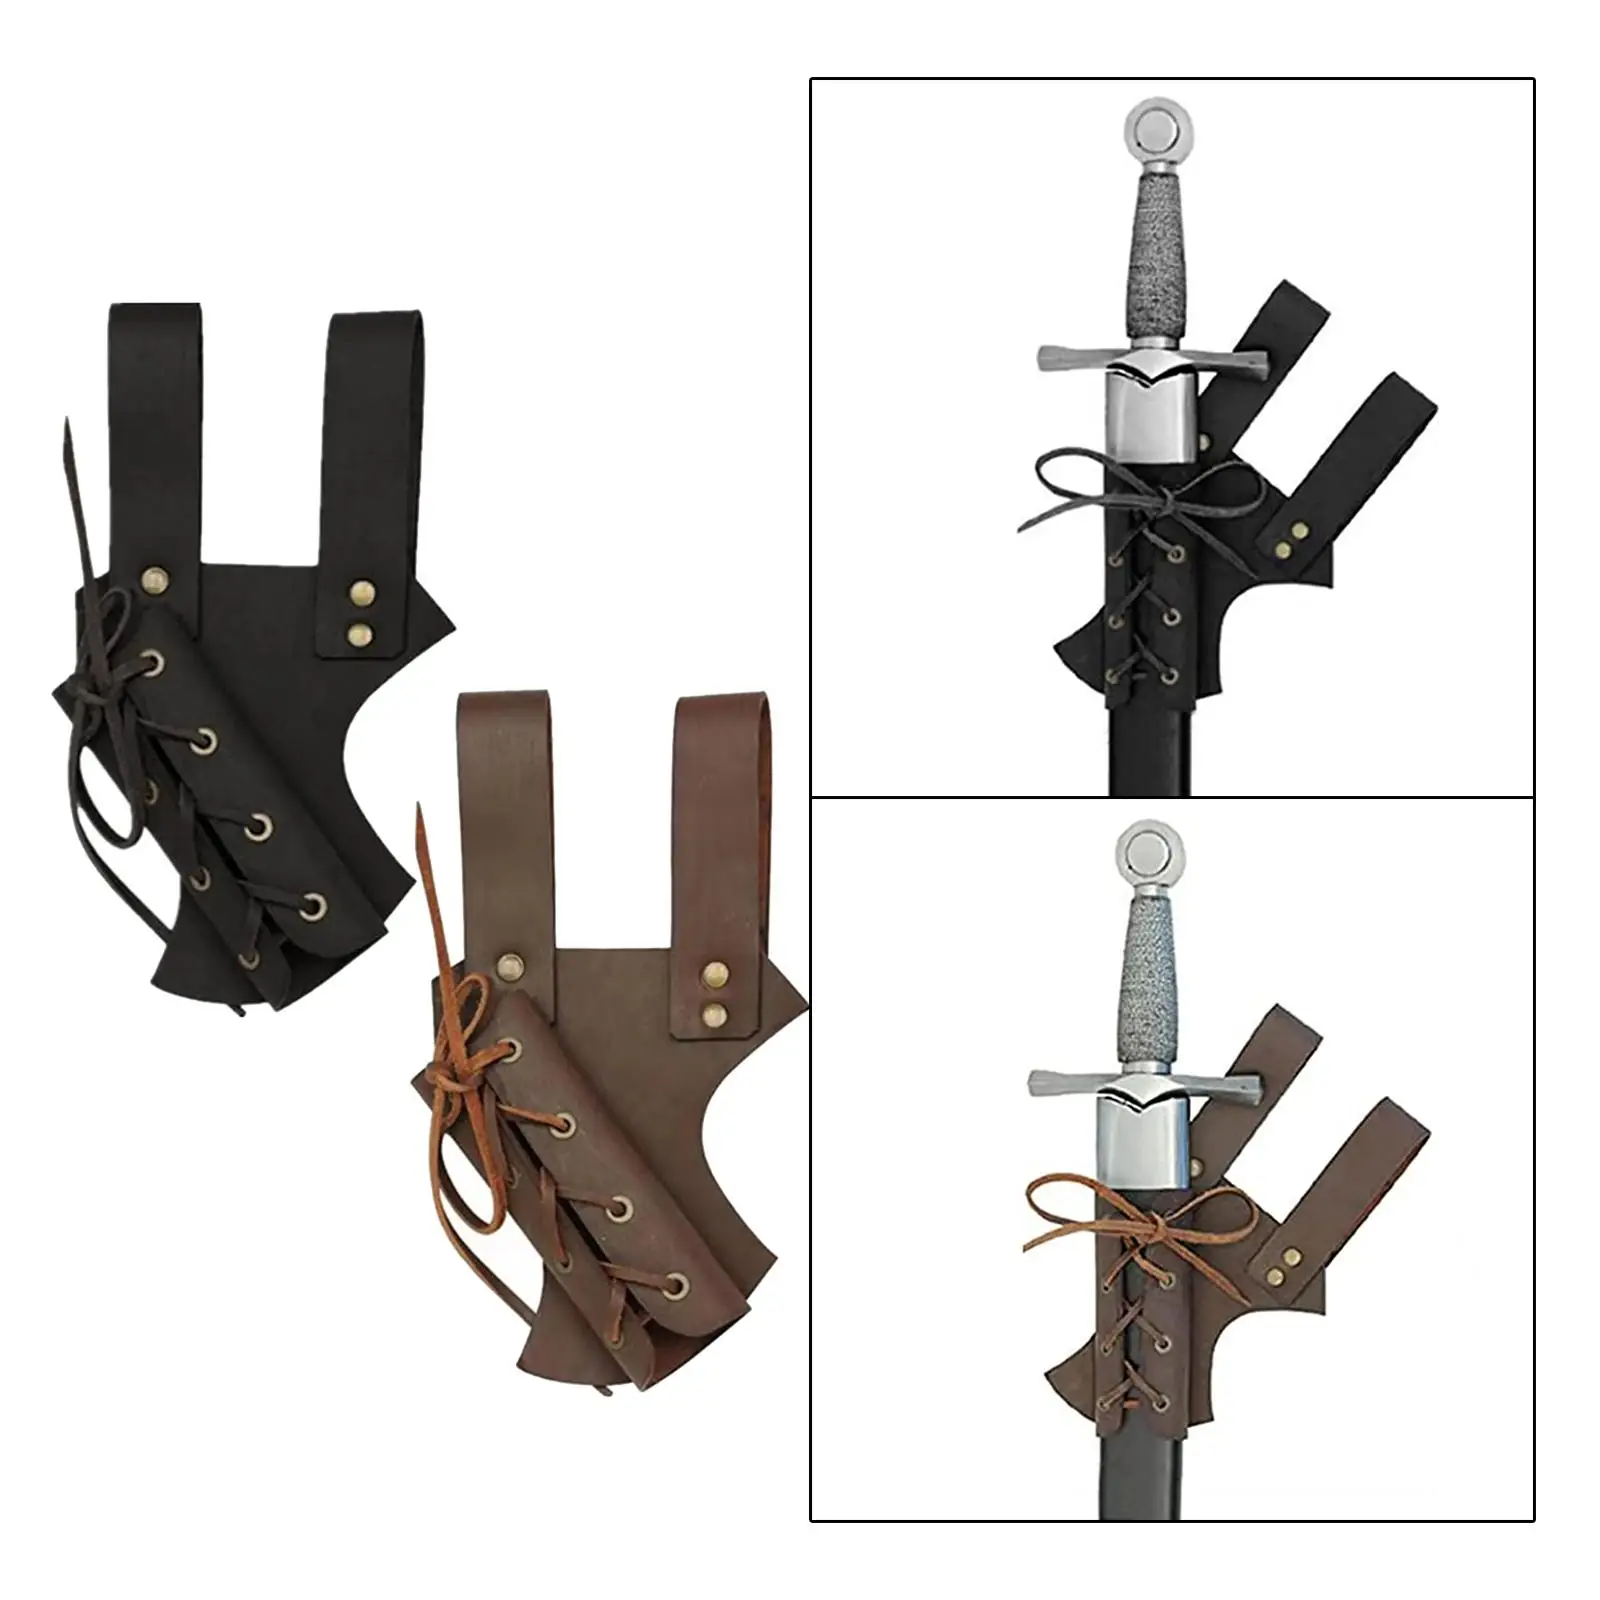 Medieval Renaissance PU Leather Belt Sword Sheath Knight Rapier Weapon Scabbard for Men Pirate Cosplay Party Performance Stage